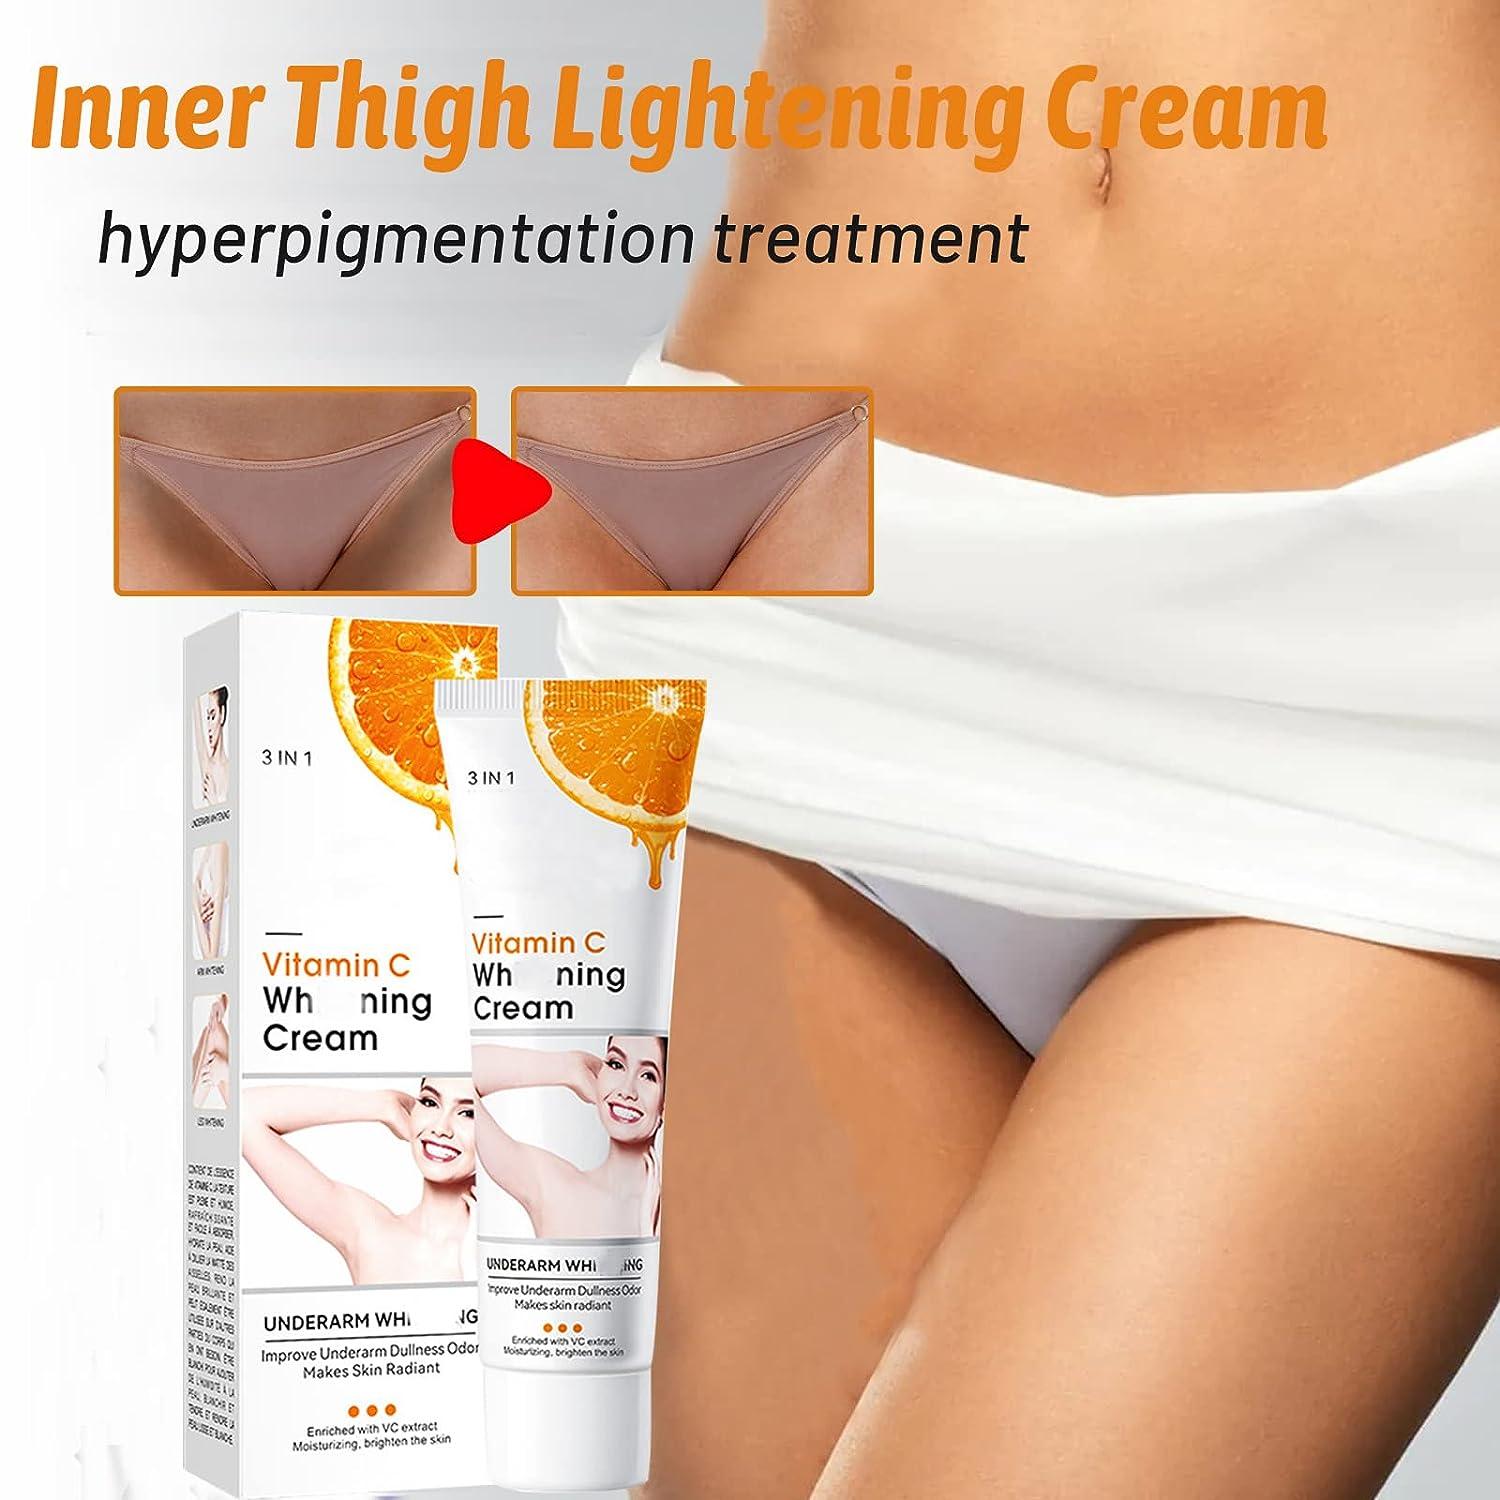 This product is great at removing dark areas on the inner thigh